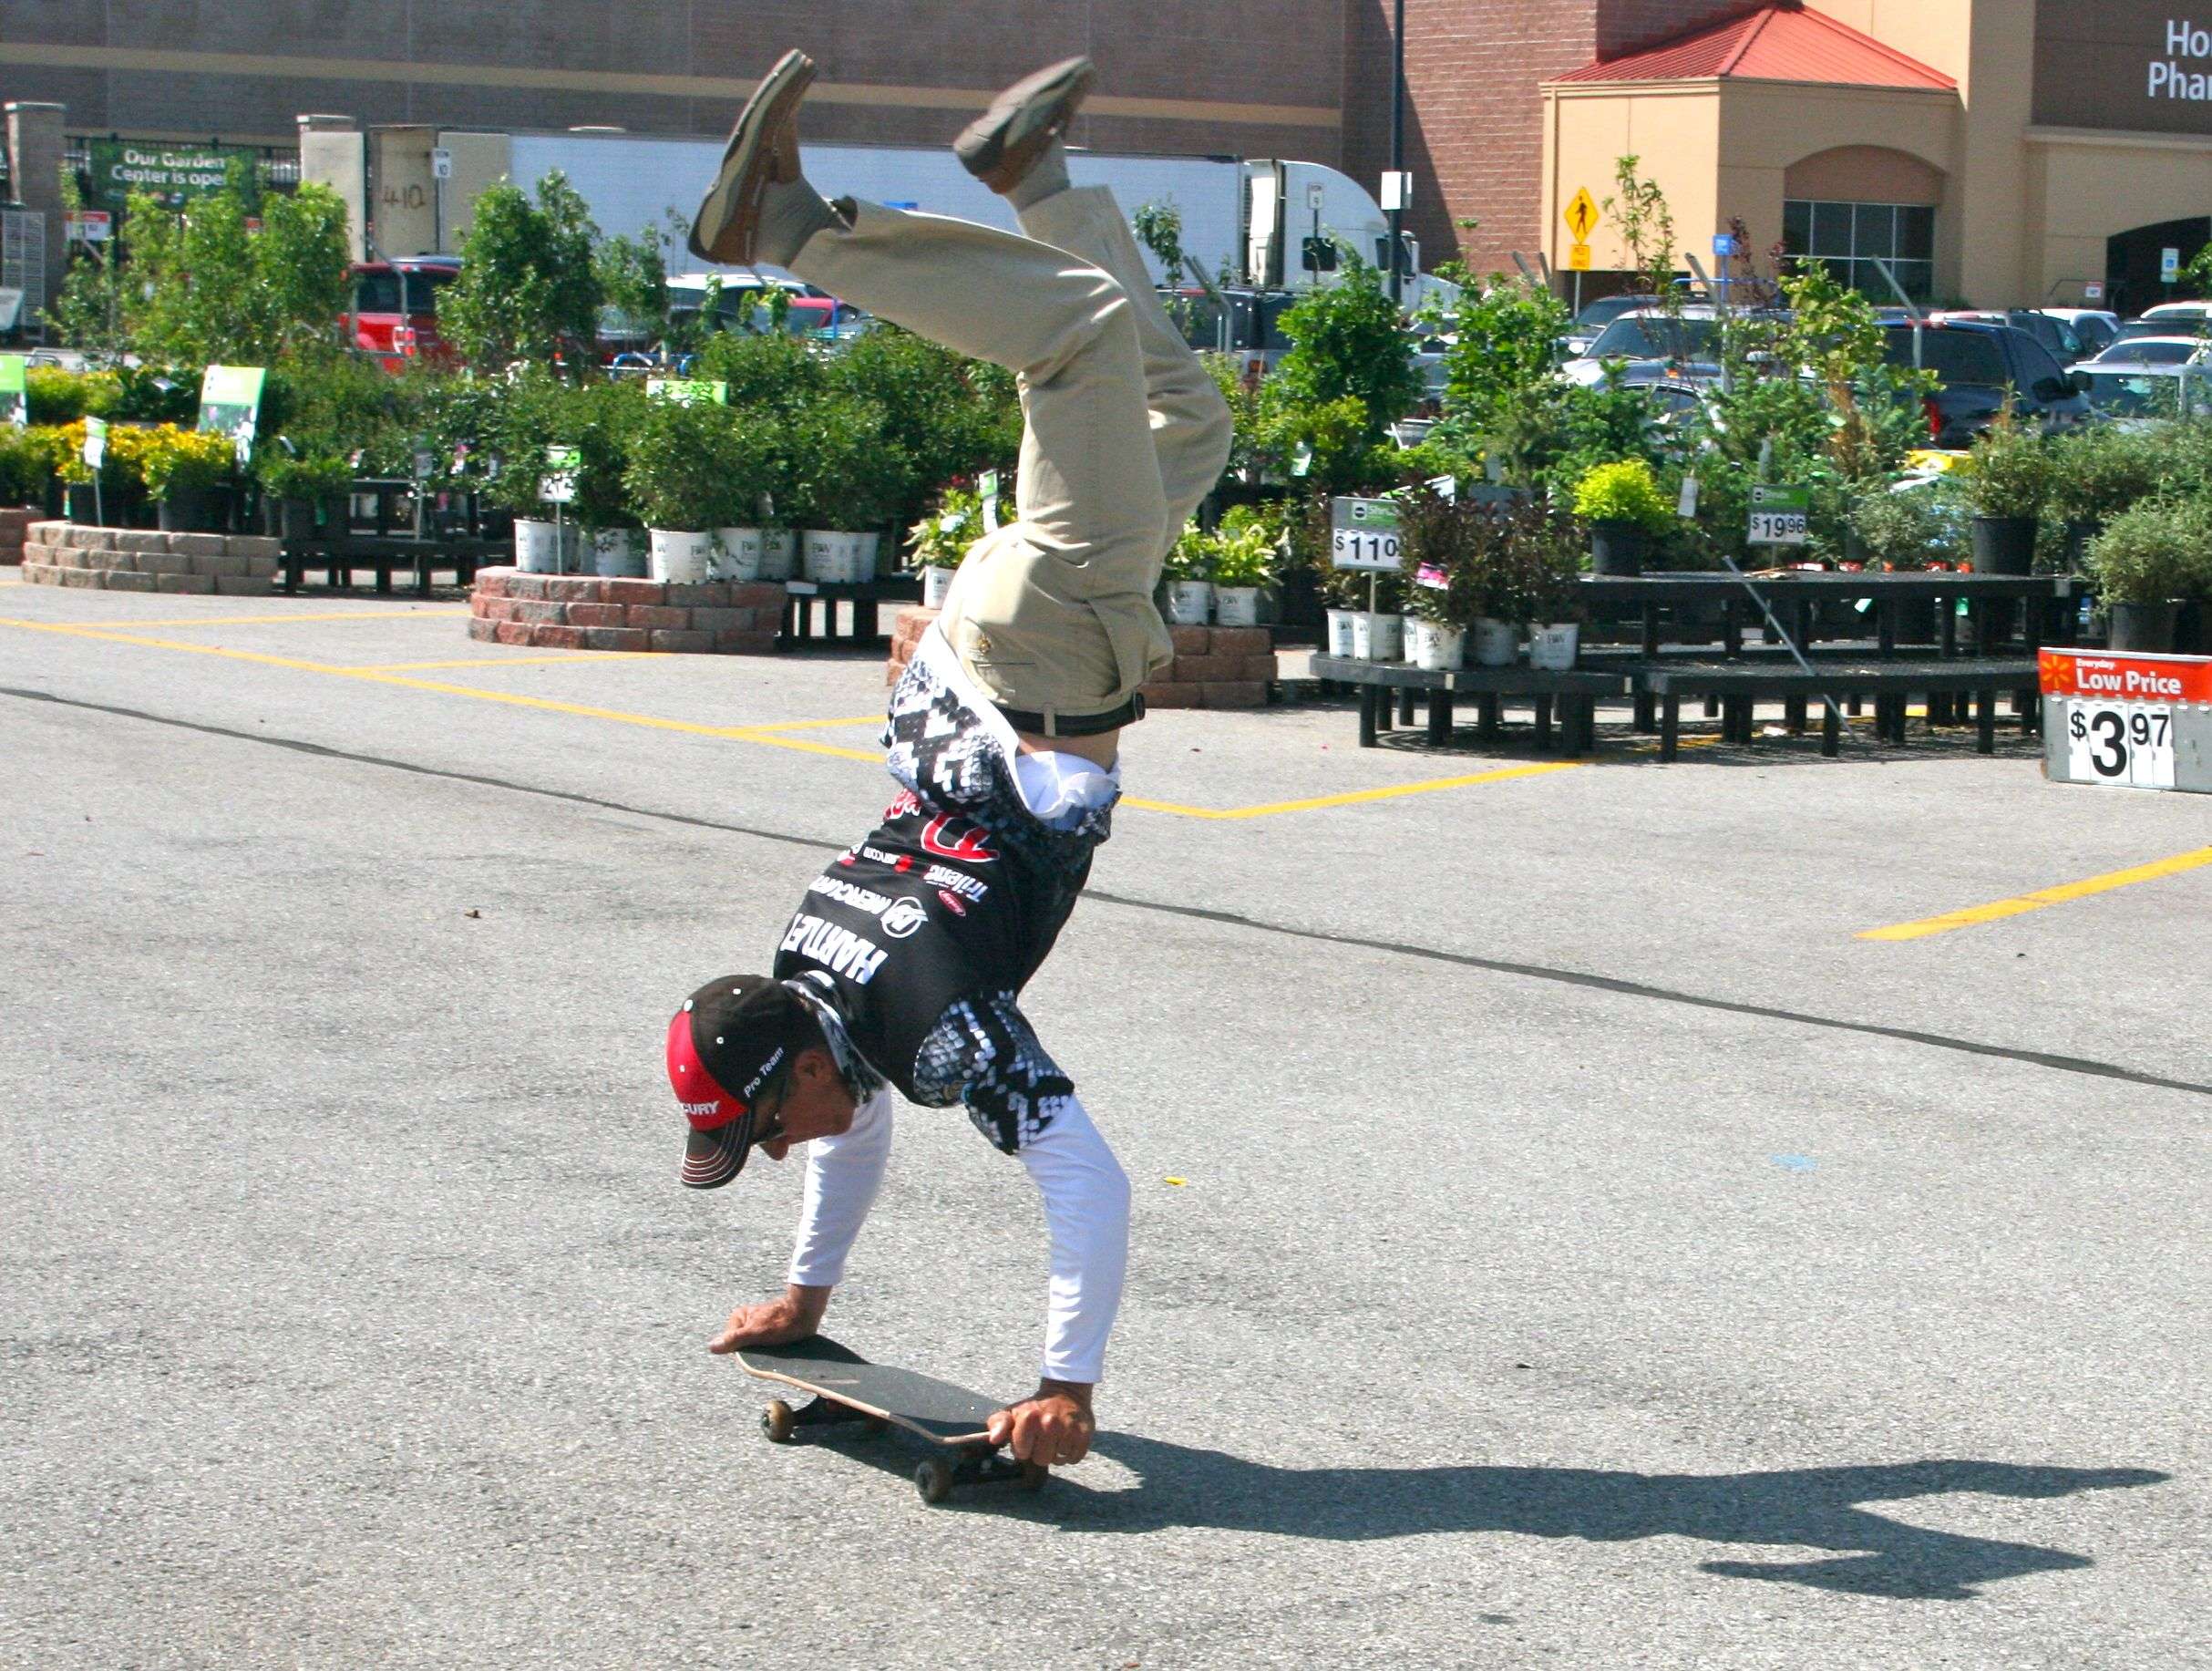 Hartley can still perform a few tricks on a skateboard, as demonstrated by a handstand he held long enough to capture with this photo.